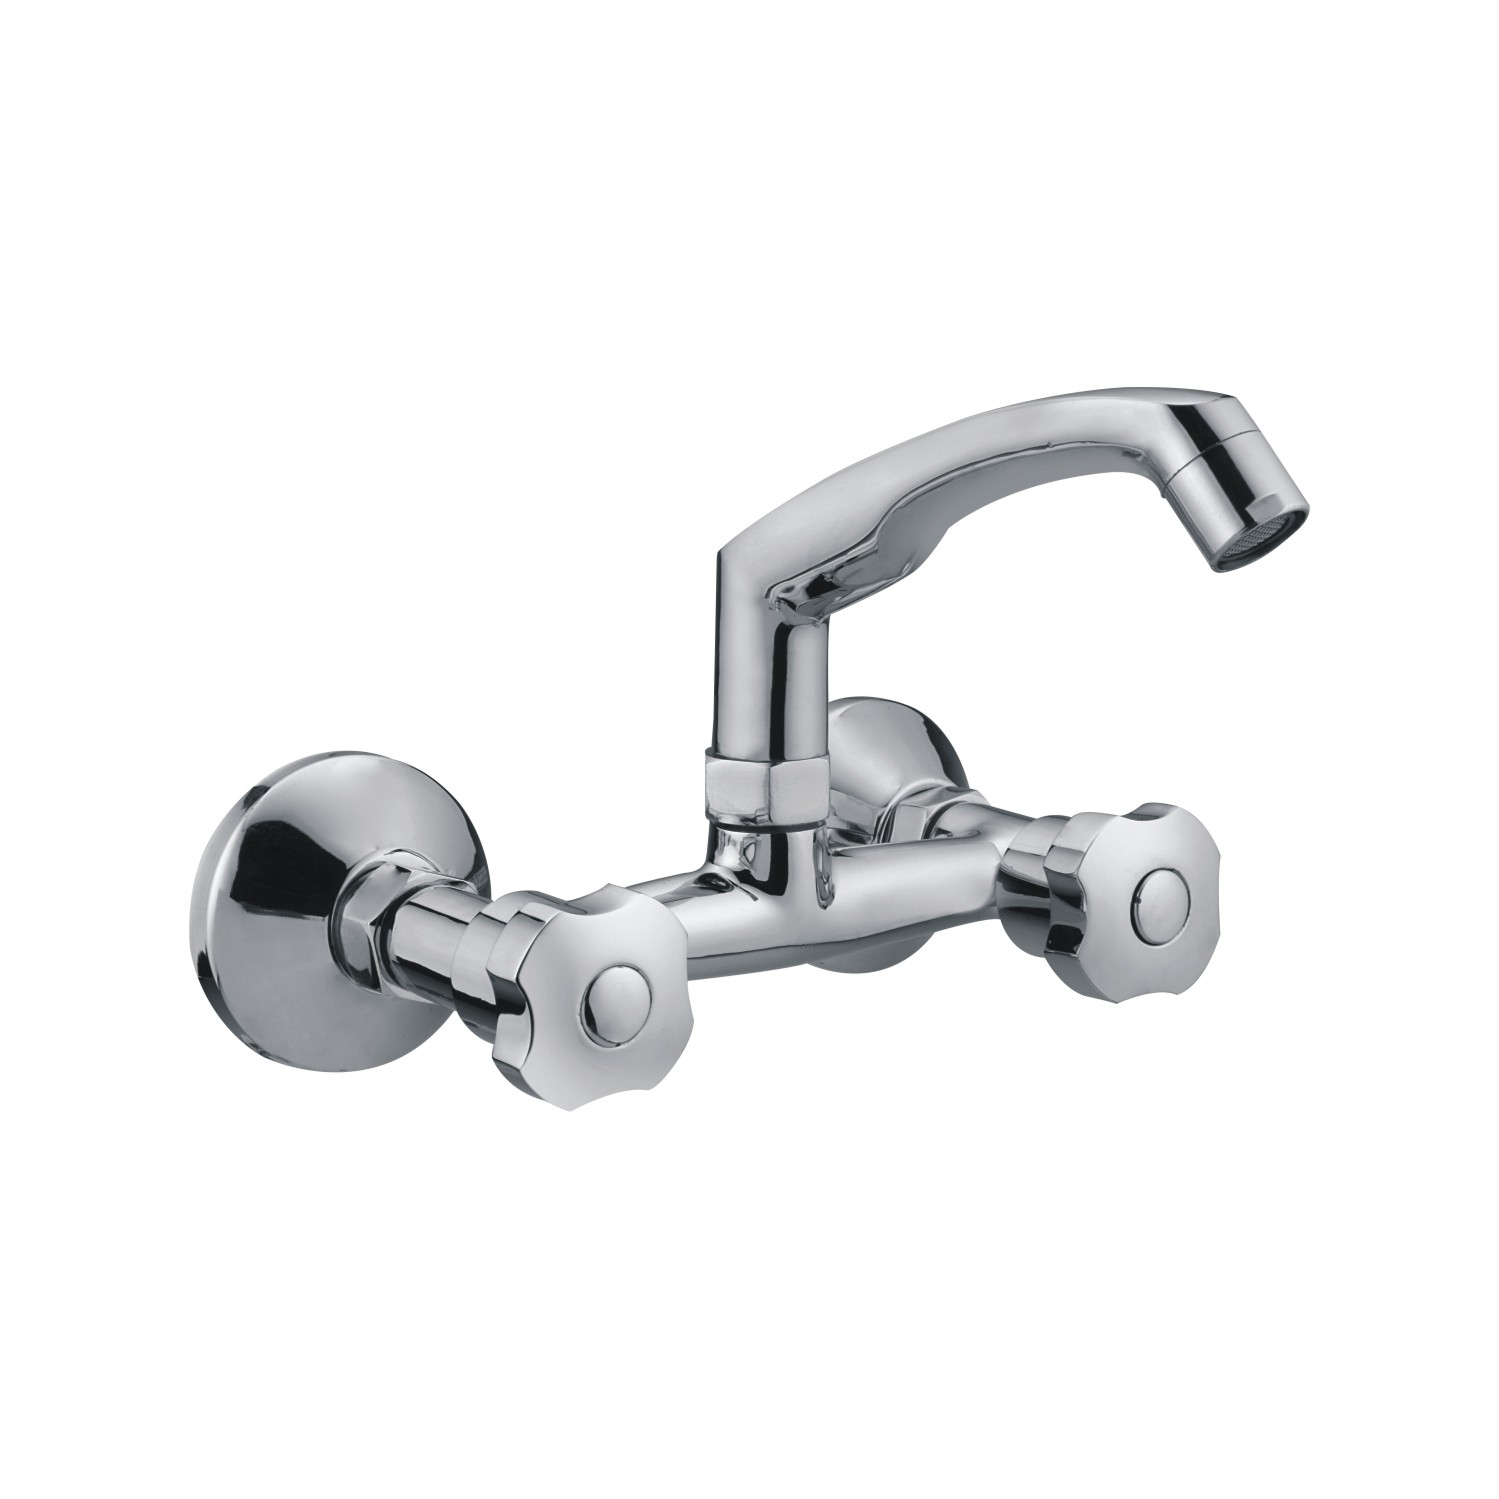 Valura Sink Mixer with Swivel Spout